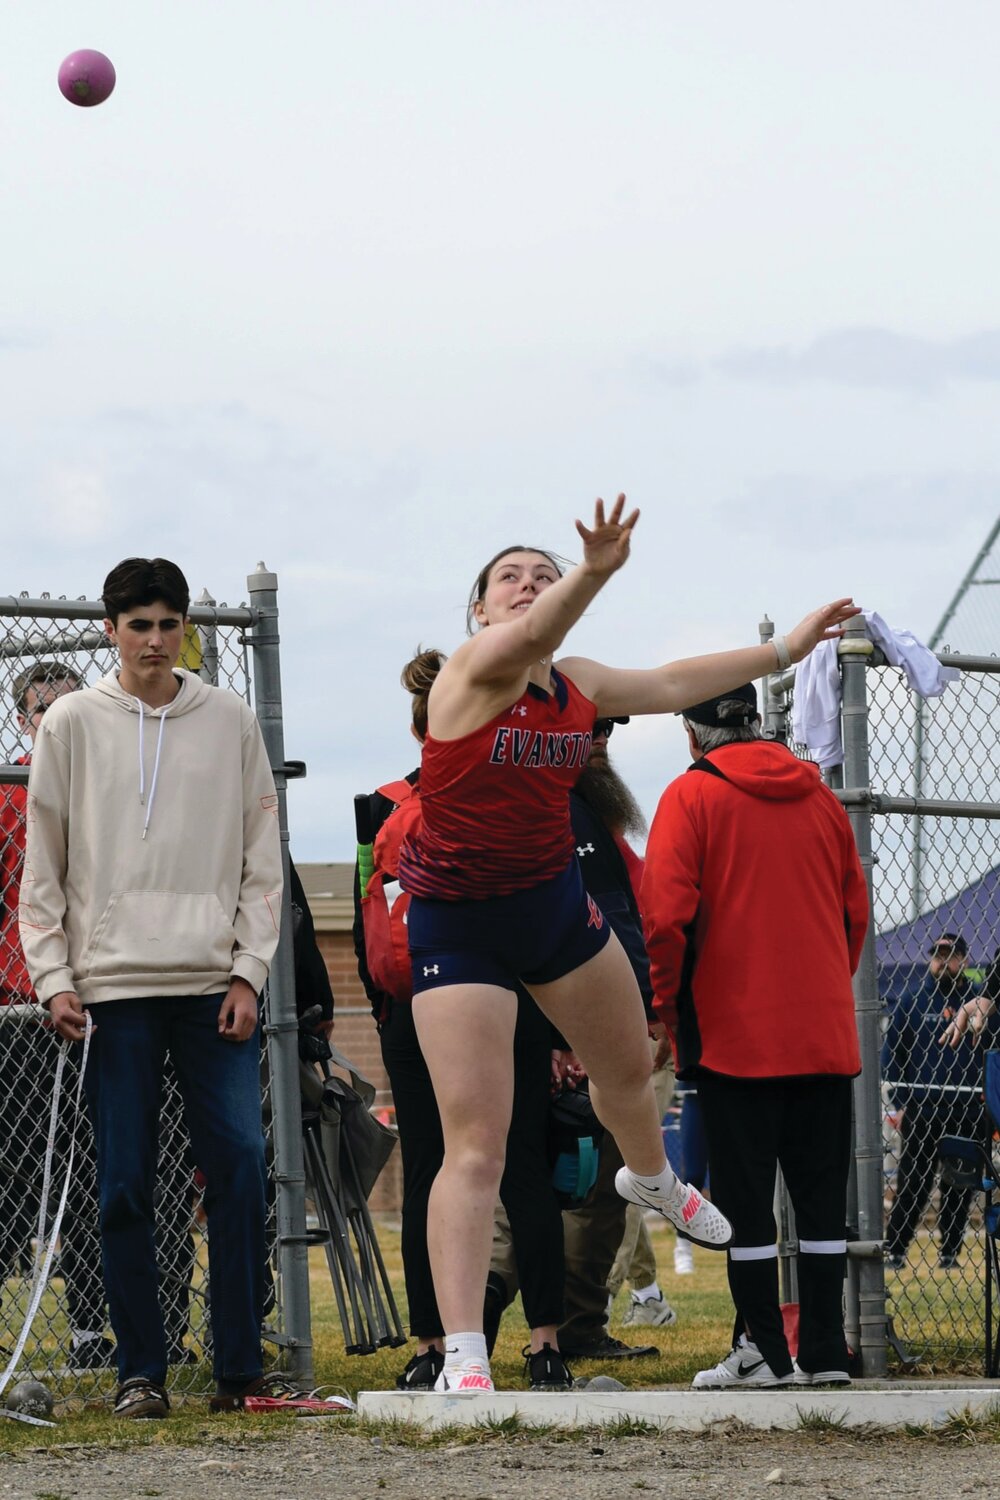 Lady Devil thrower Alyssa Brown finished fourth in the shot put at last week’s Alpha Invitational, with a throw of 34 feet, 6 inches.